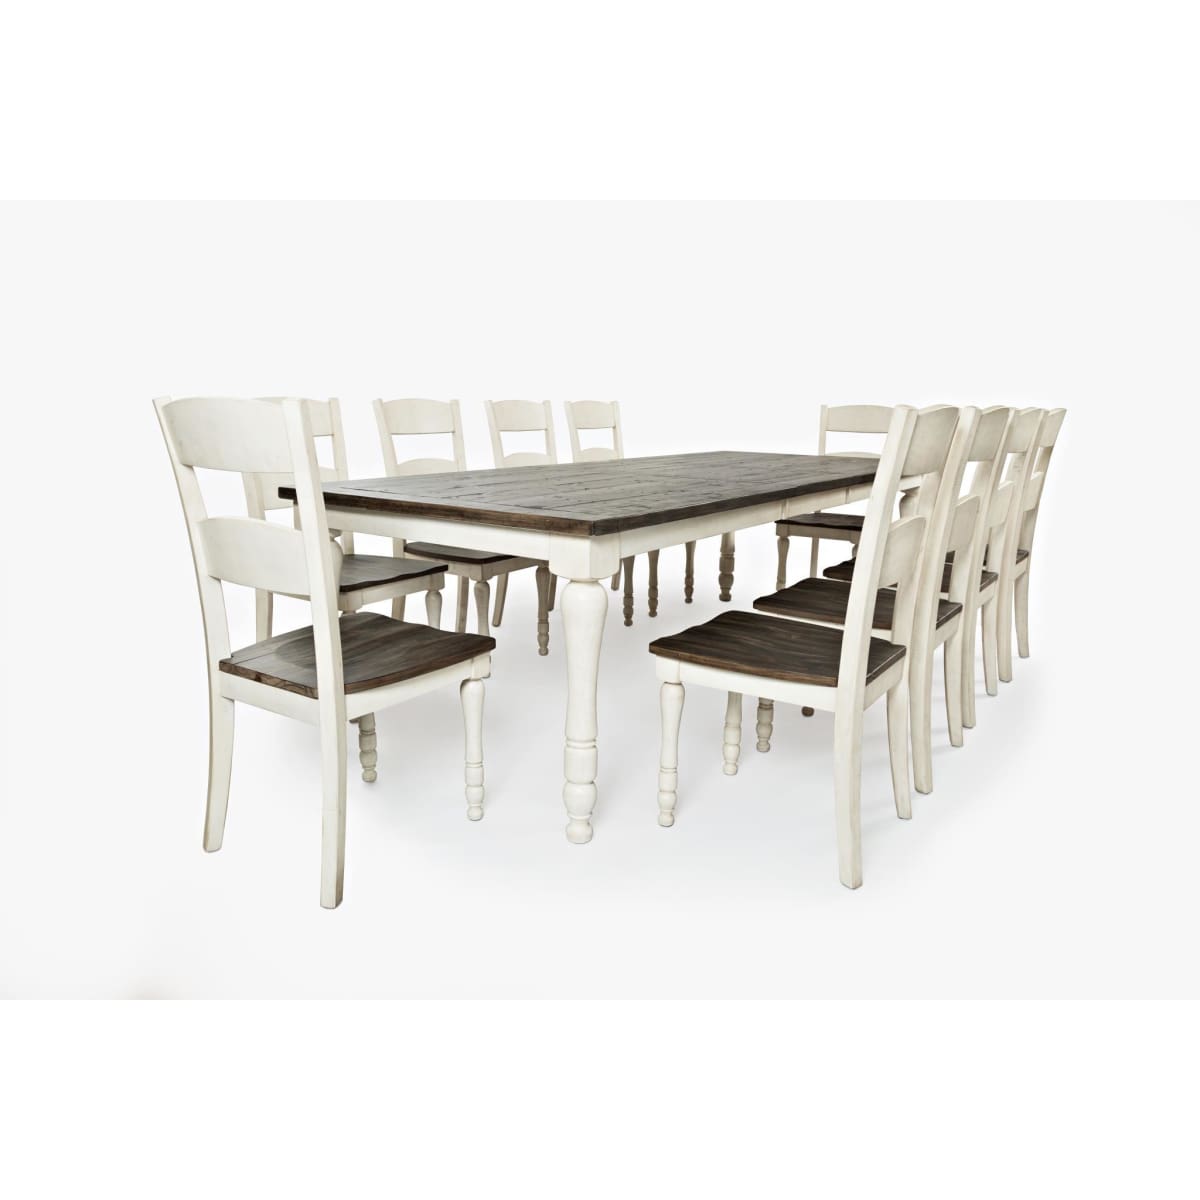 Madison County Vintage White Rectangle Extension Table 7pc Set - Width: 42 x Depth: 84(96 with Extension) x Height: 30 / Vintage White / 